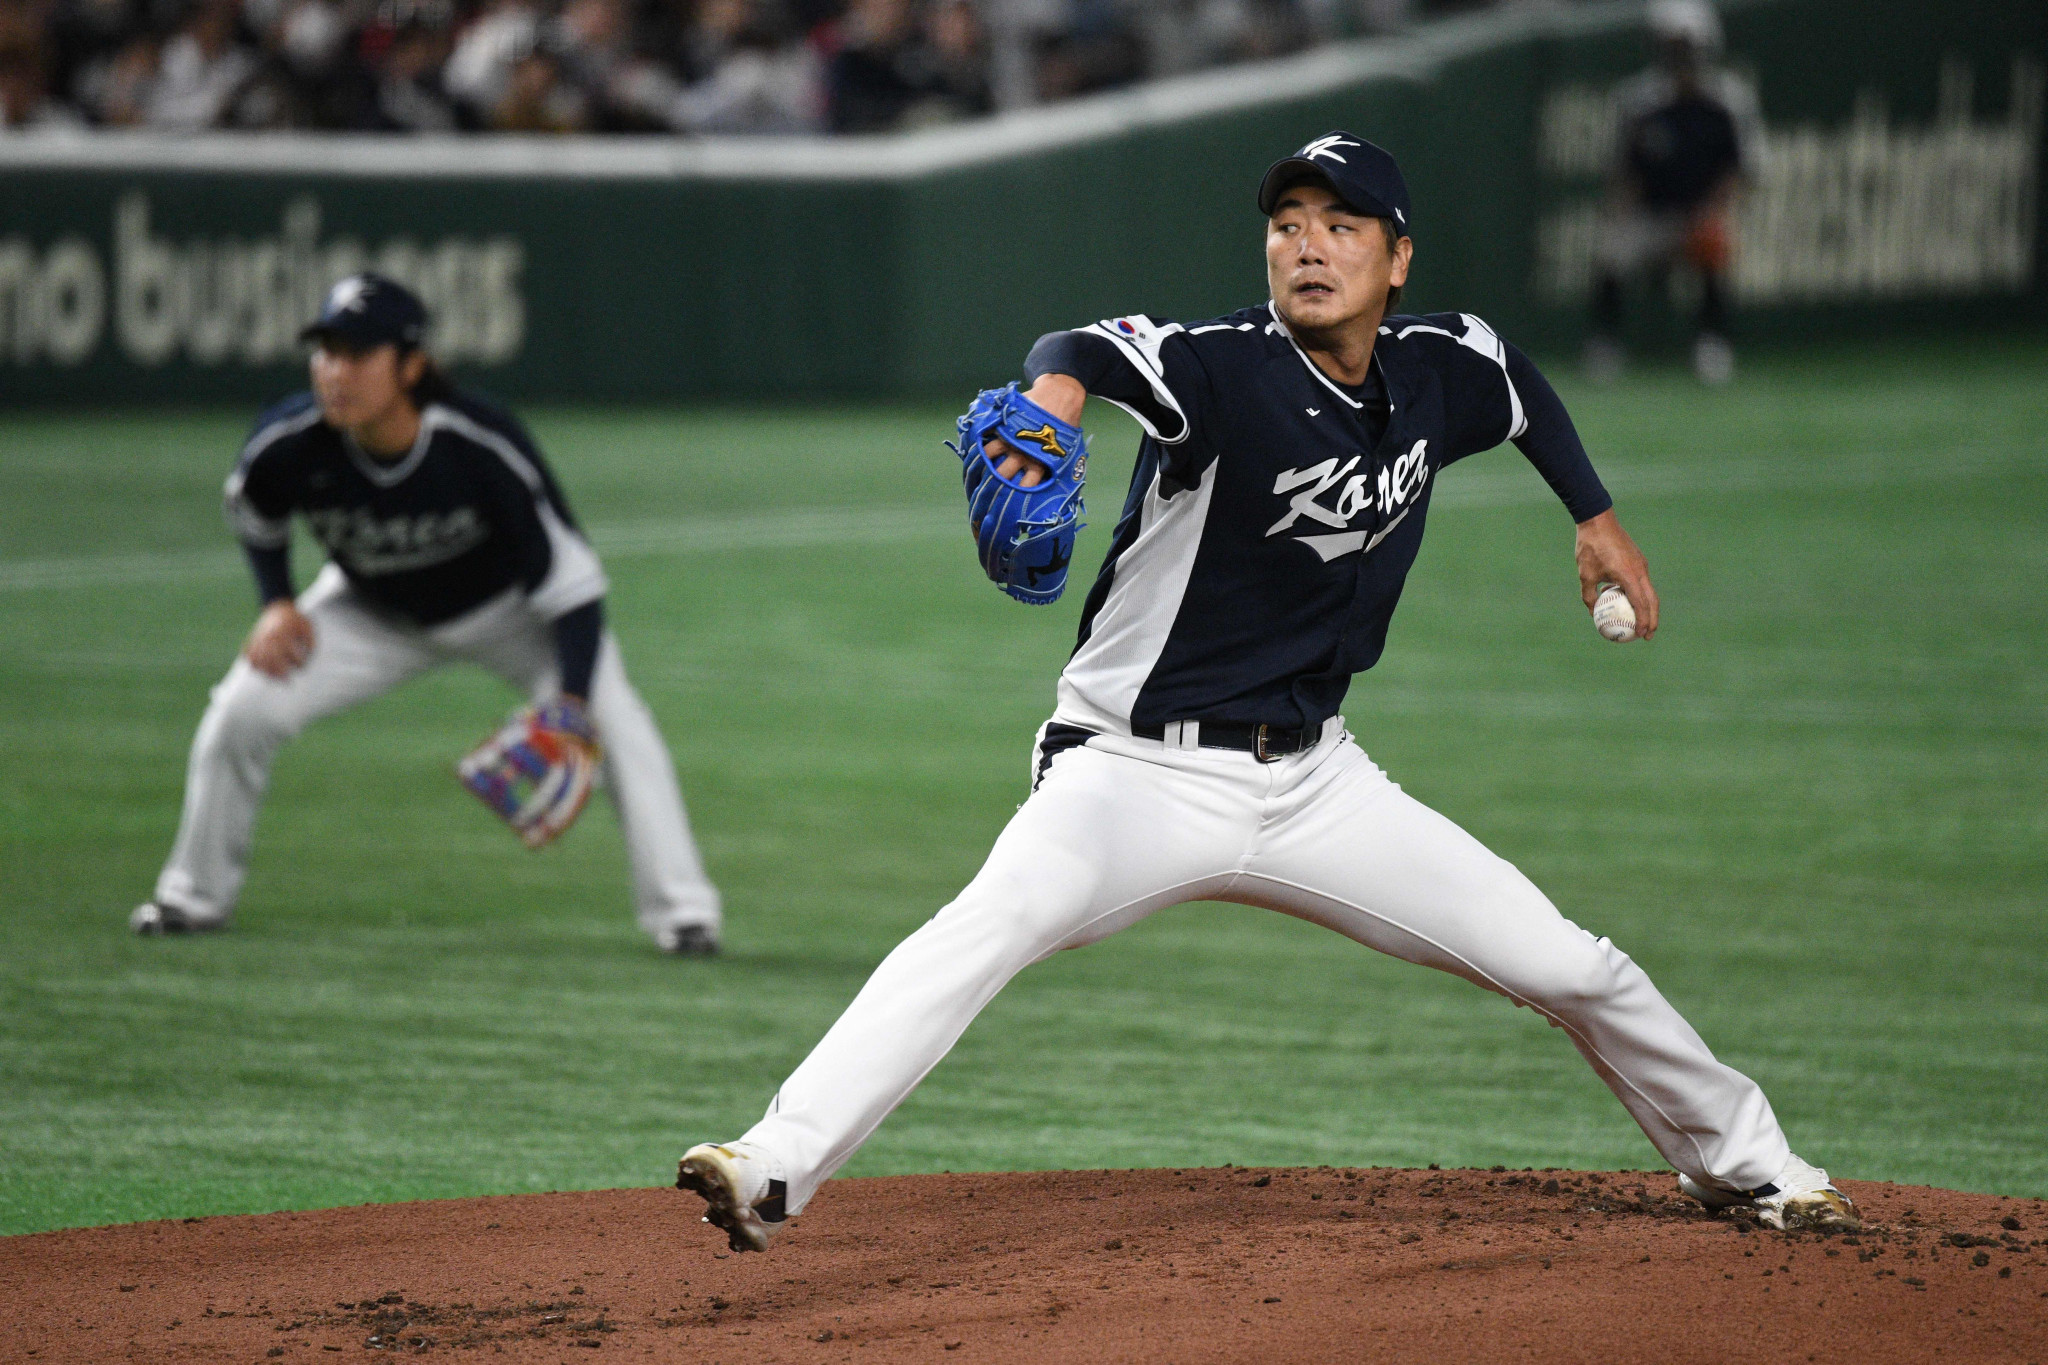 Kim Kwang-hyun pitches against Japan at the World Baseball Classic in March ©Getty Images